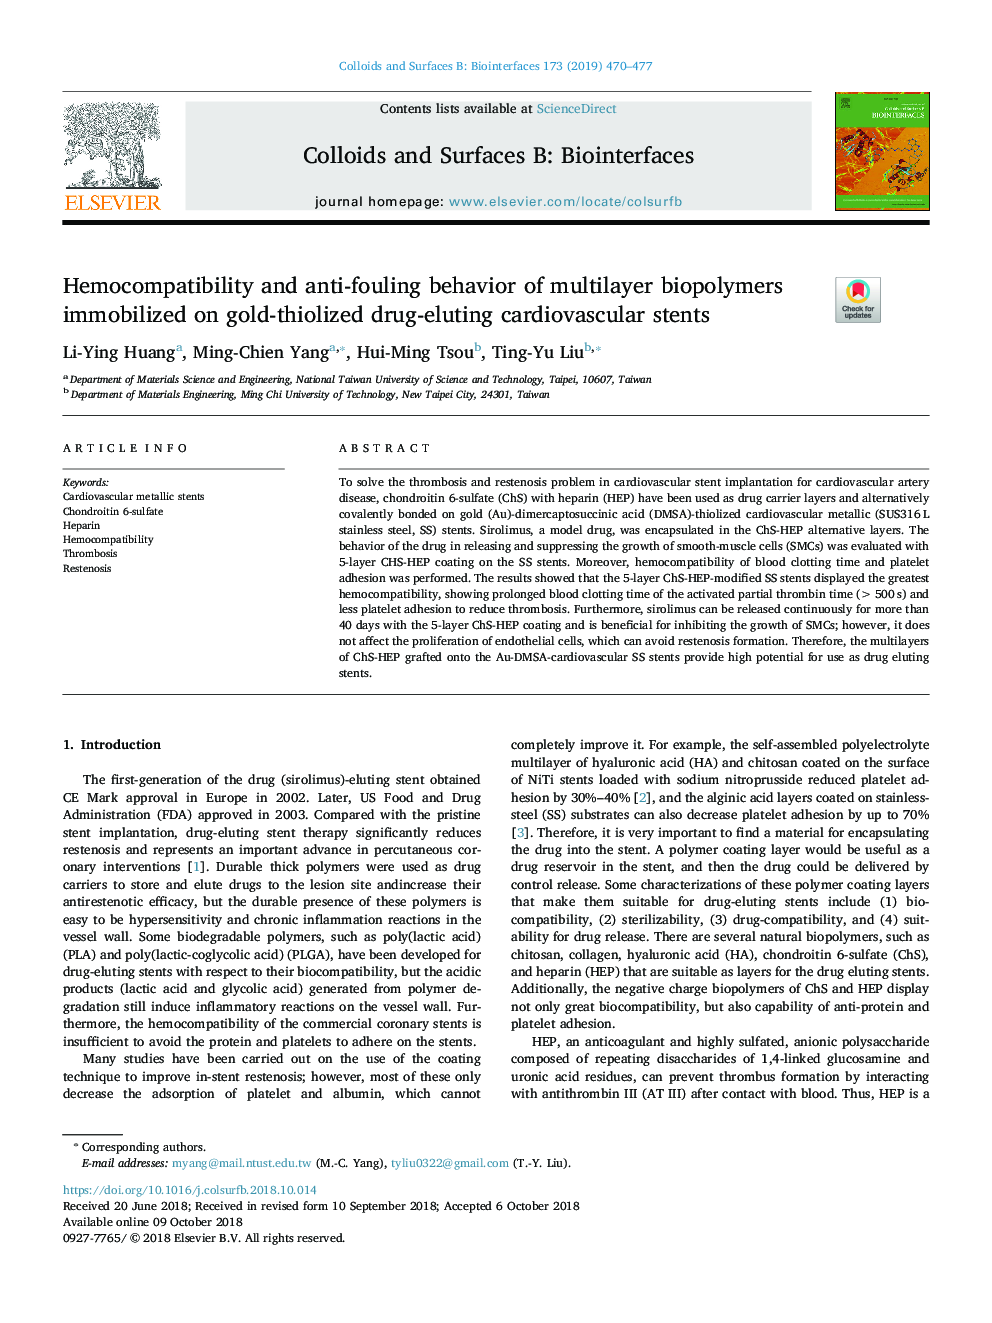 Hemocompatibility and anti-fouling behavior of multilayer biopolymers immobilized on gold-thiolized drug-eluting cardiovascular stents